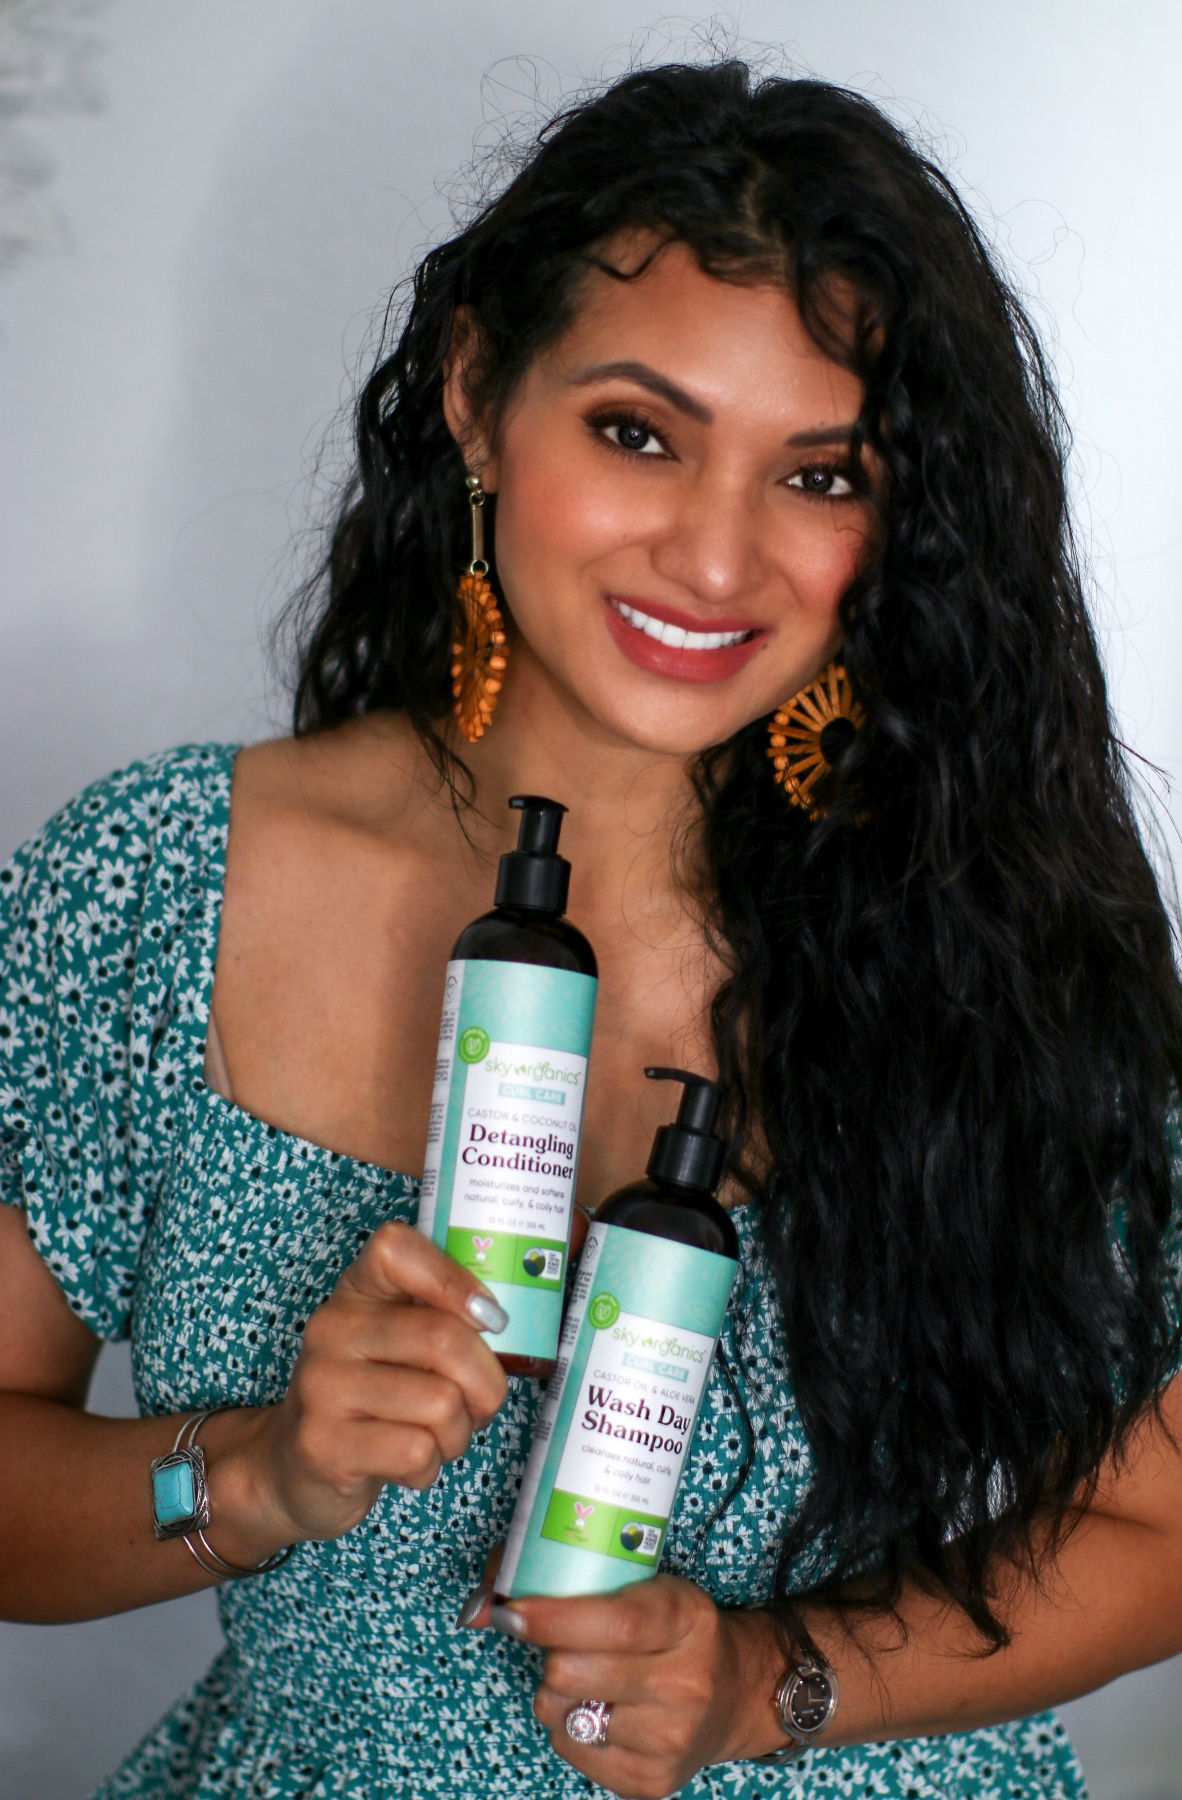 These plant-powered ingredients maximize moisture, boost shine, and protect your waves, curls, and coils for healthier-looking hair that feels great too! Each Sky Organics hair-care product is USDA Bio-Based certified, meaning their collection uses plant-derived and renewable ingredients. You can actually find the exact percentage in the Bio-Based logo on every product. What is really fabulous is that a portion of the proceeds of the line is donated to the Black Women’s Health Imperative, a non-profit organization working to ensure equal access to health and wellness for Black women and girls. I absolutely love the Sky Organics Curl Care Line! My hair looks and feels so soft and healthy. You can find this line at select Walmart stores in the Textured Hair aisle. Make sure to pick up this bio-based naturally textured hair product line!